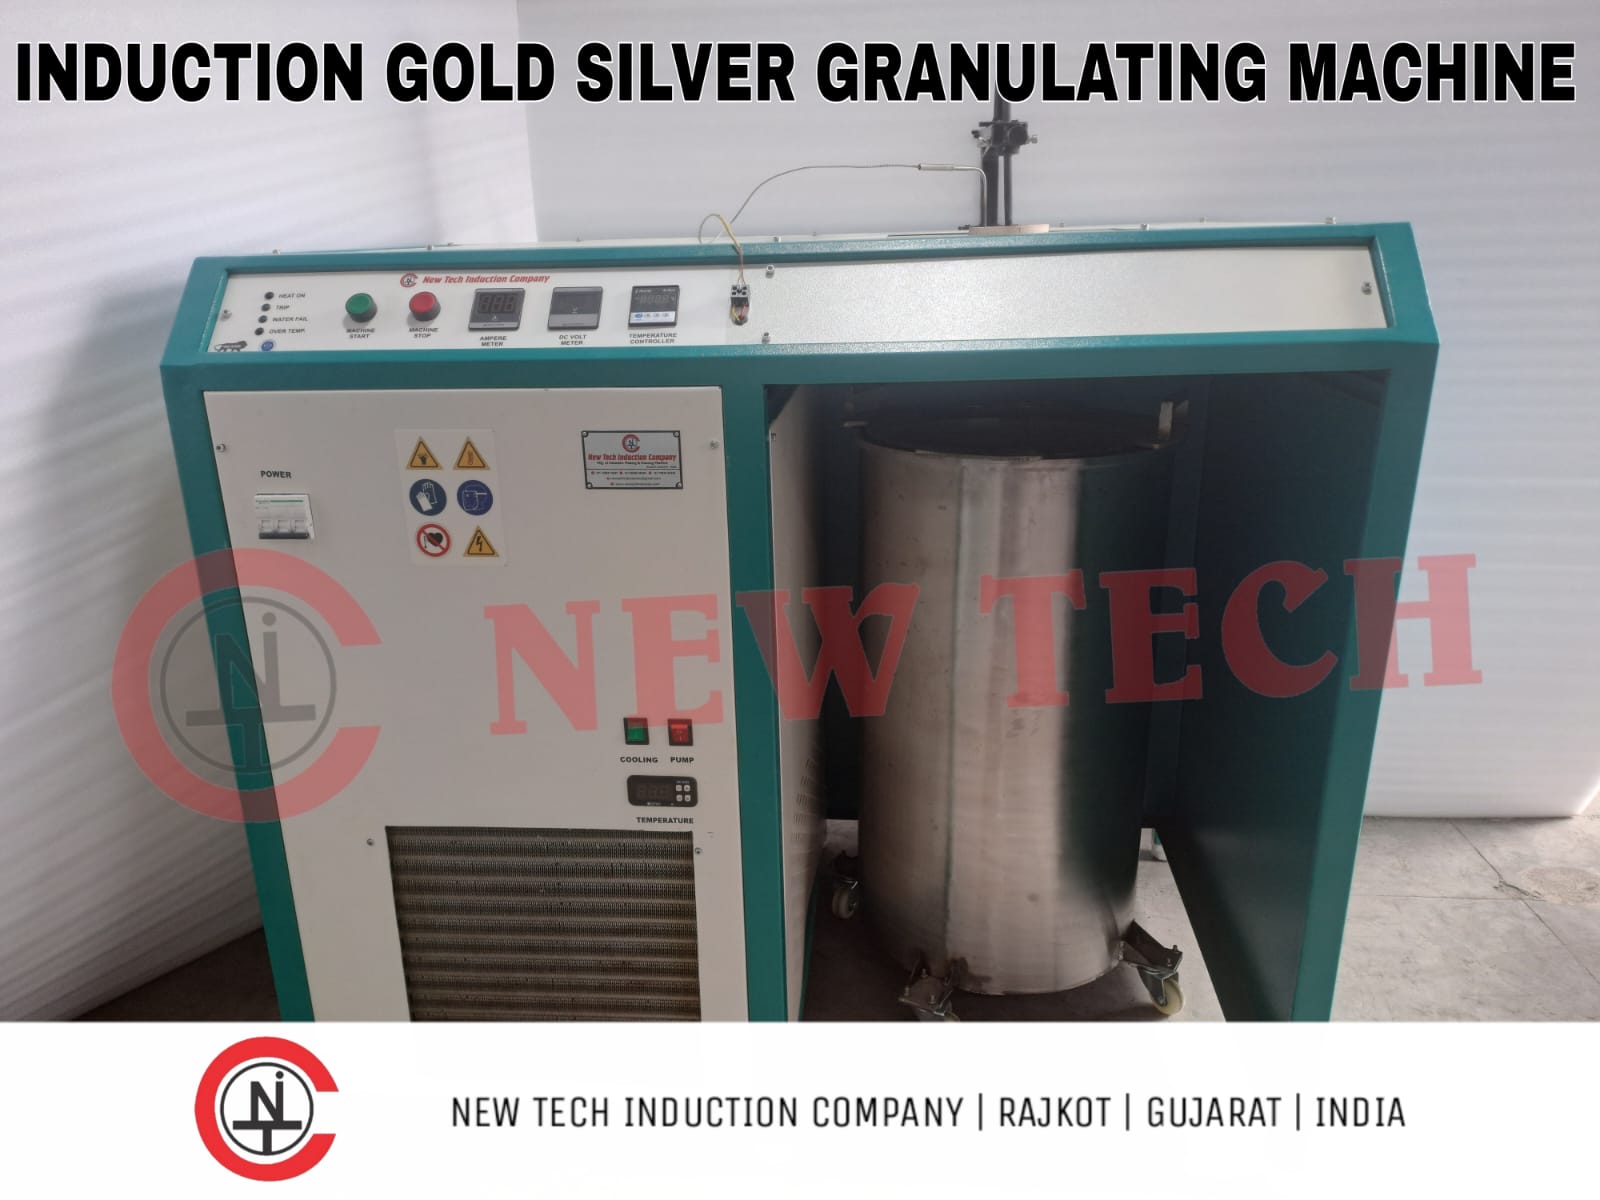 Induction Gold Silver Granulating Machine